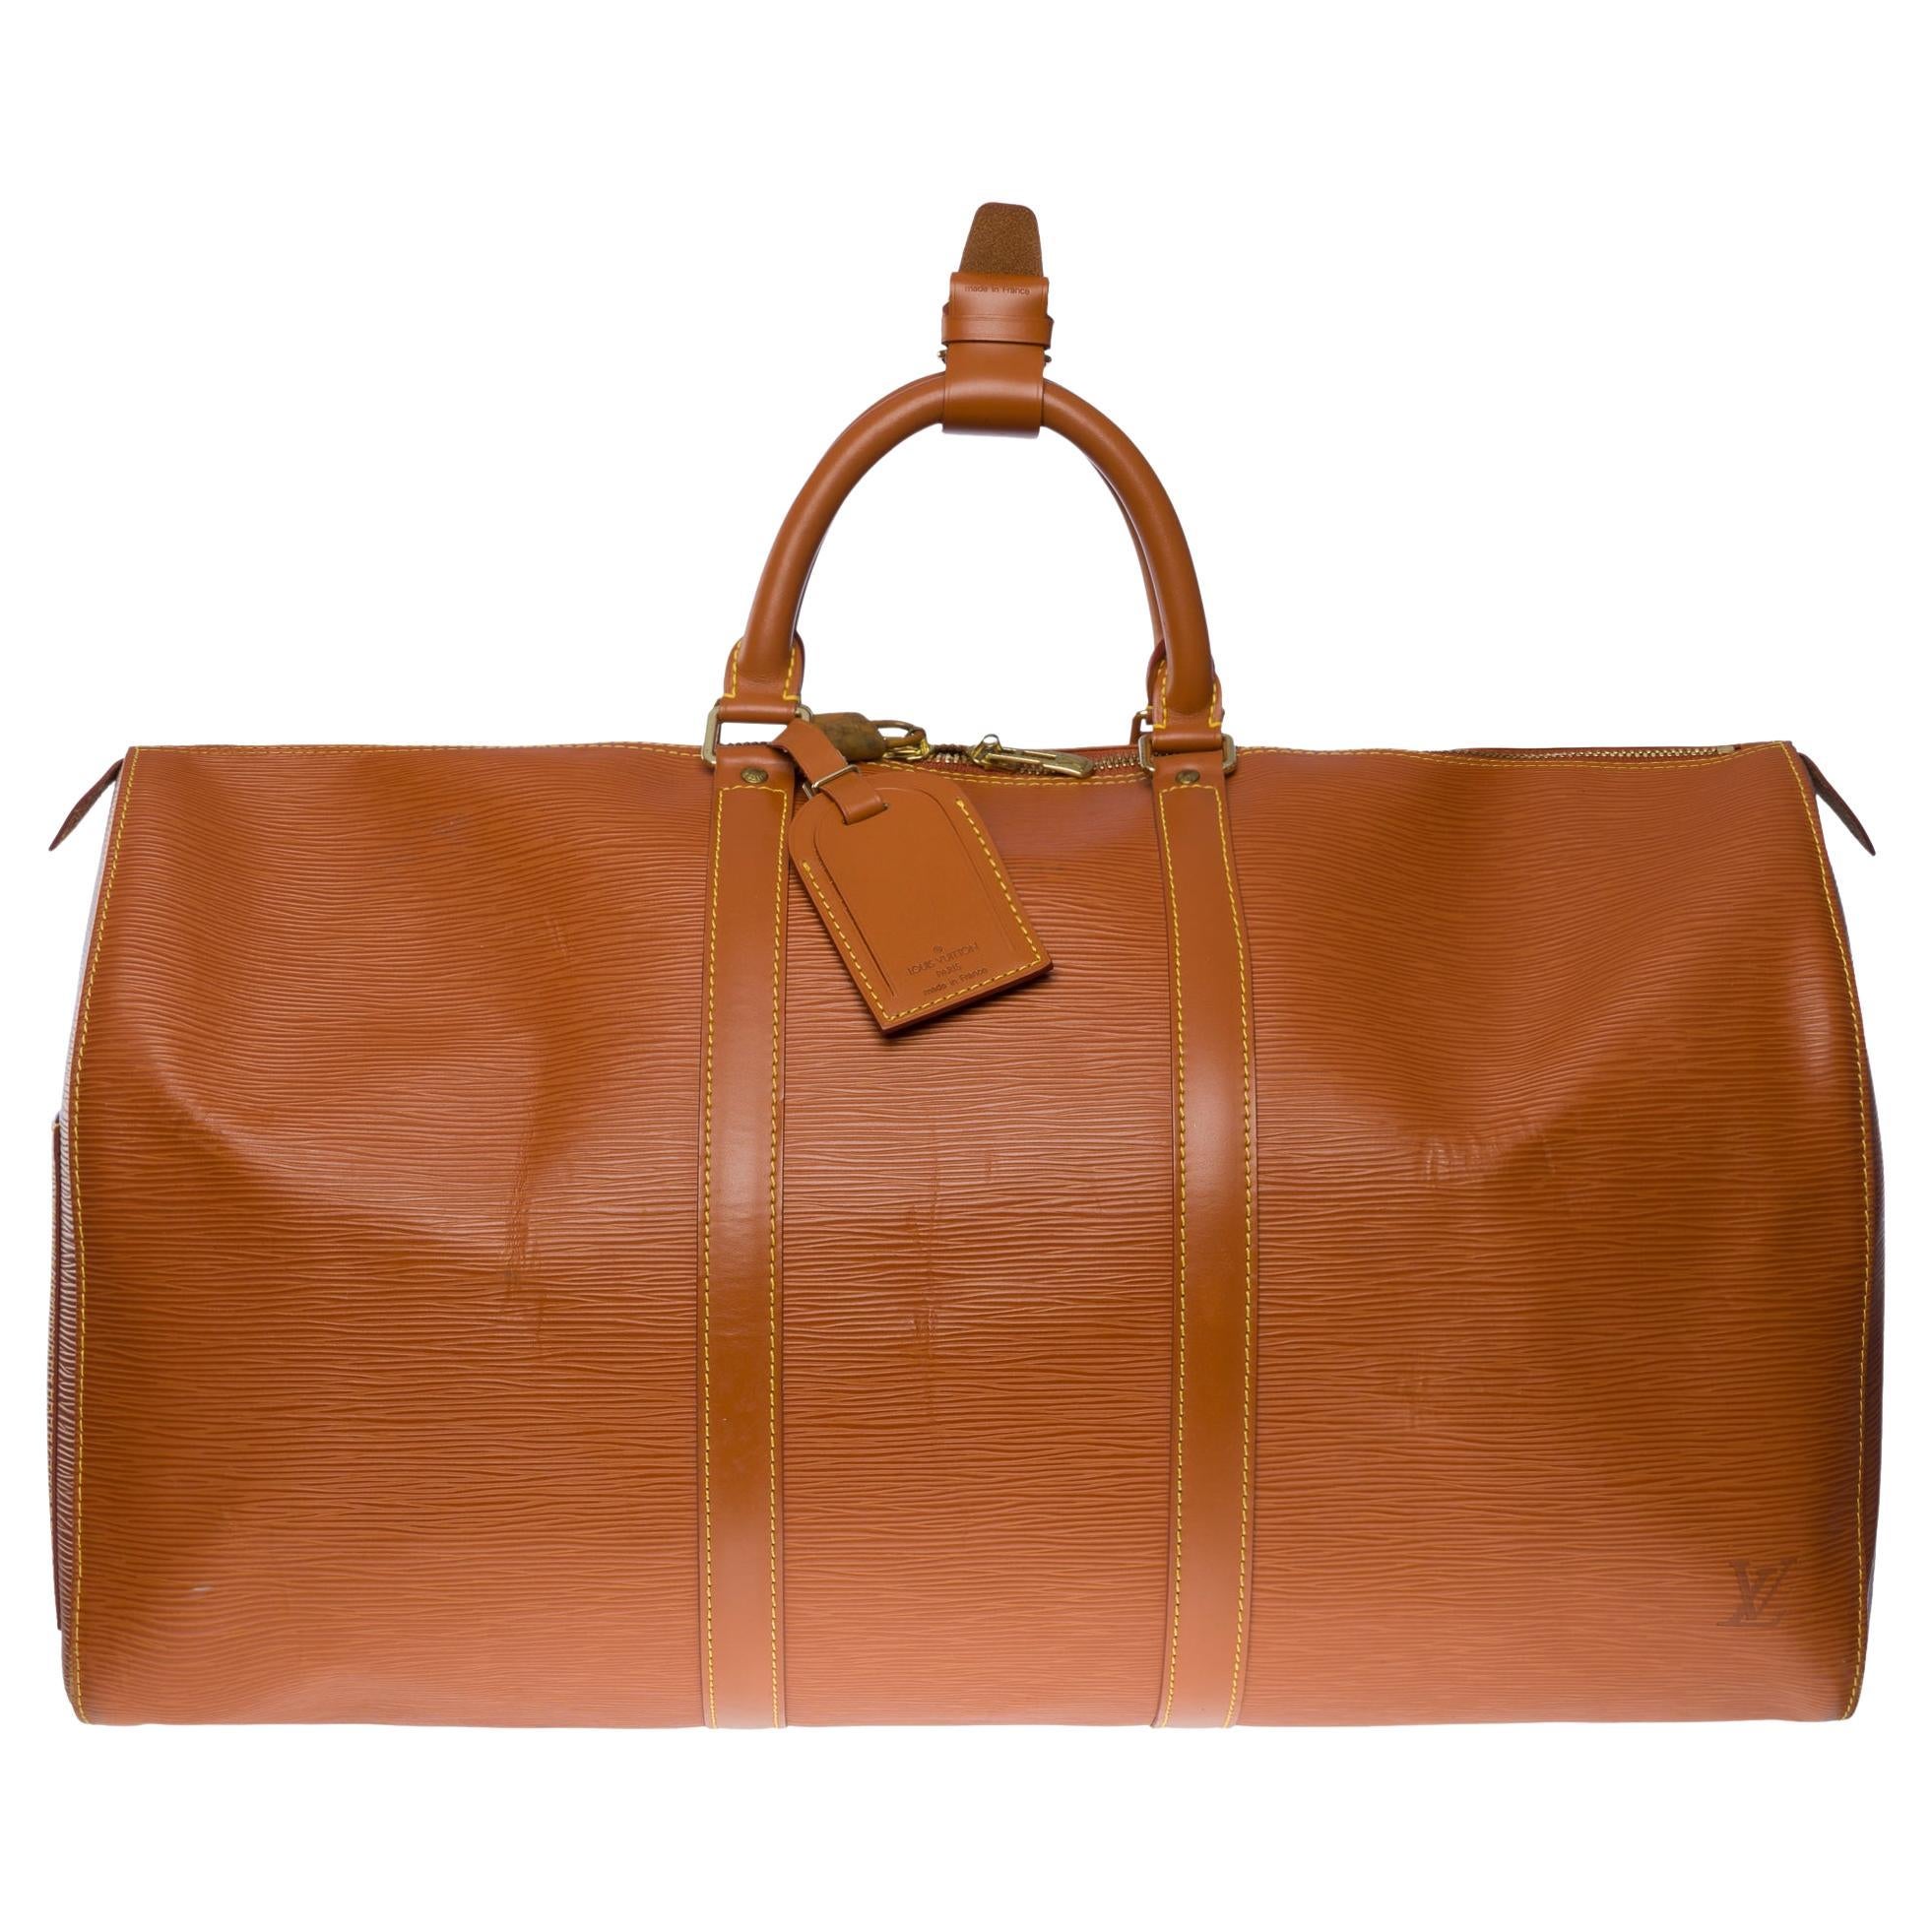 Louis Vuitton Keepall 50 Travel bag in Cognac epi leather, GHW